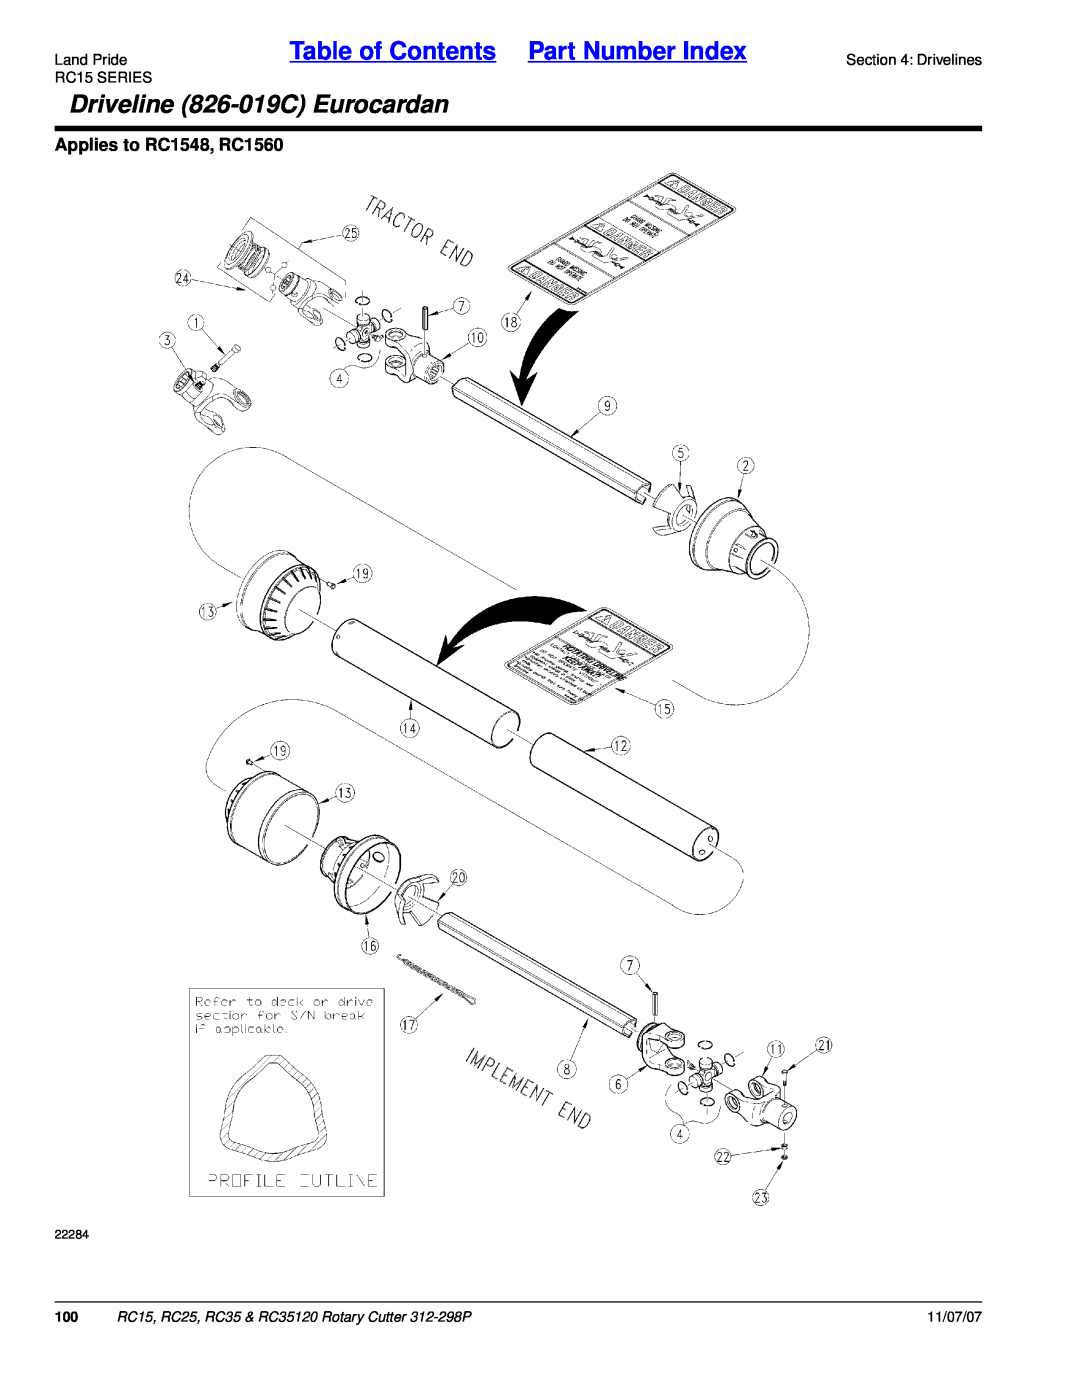 Land Pride RC35120 Driveline 826-019CEurocardan, Applies to RC1548, RC1560, Land PrideTable of Contents Part Number Index 